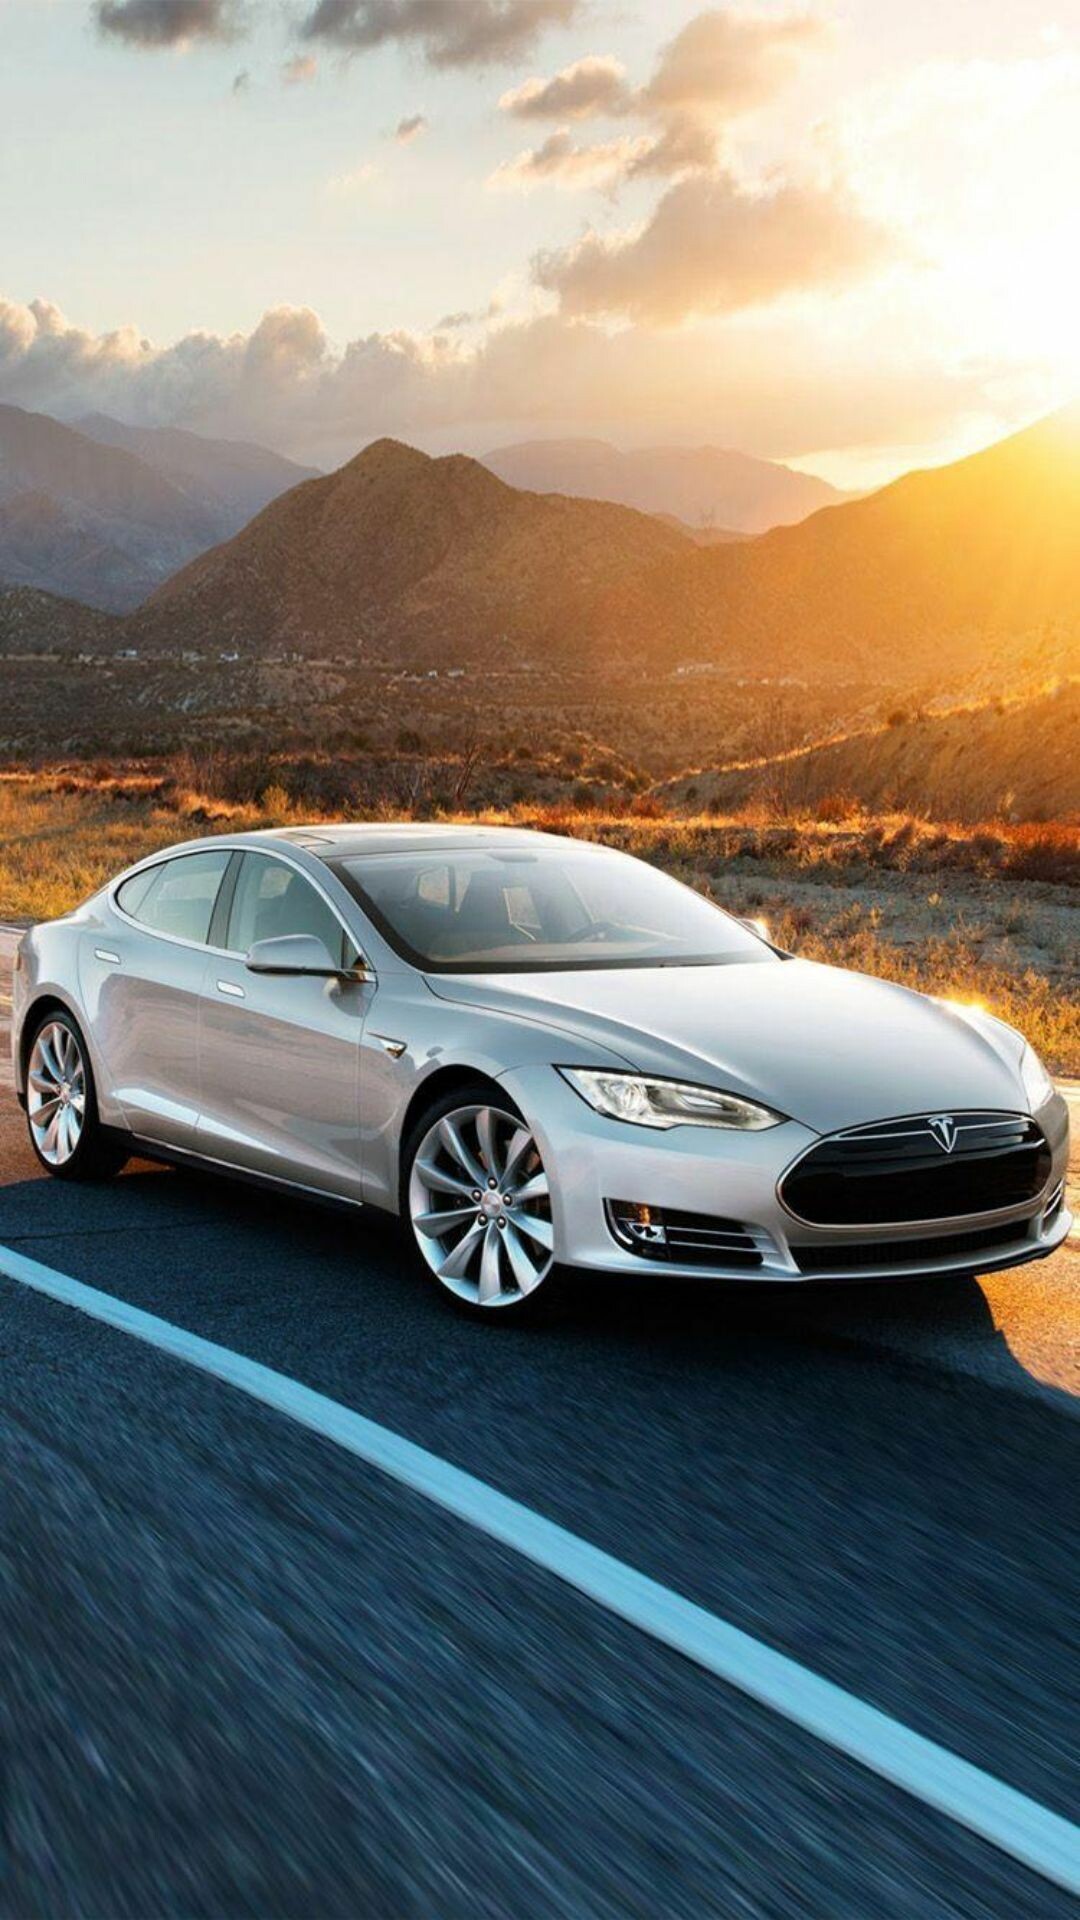 Tesla Model S: The electric-car manufacturer run by Elon Musk, A large luxury EV. 1080x1920 Full HD Background.